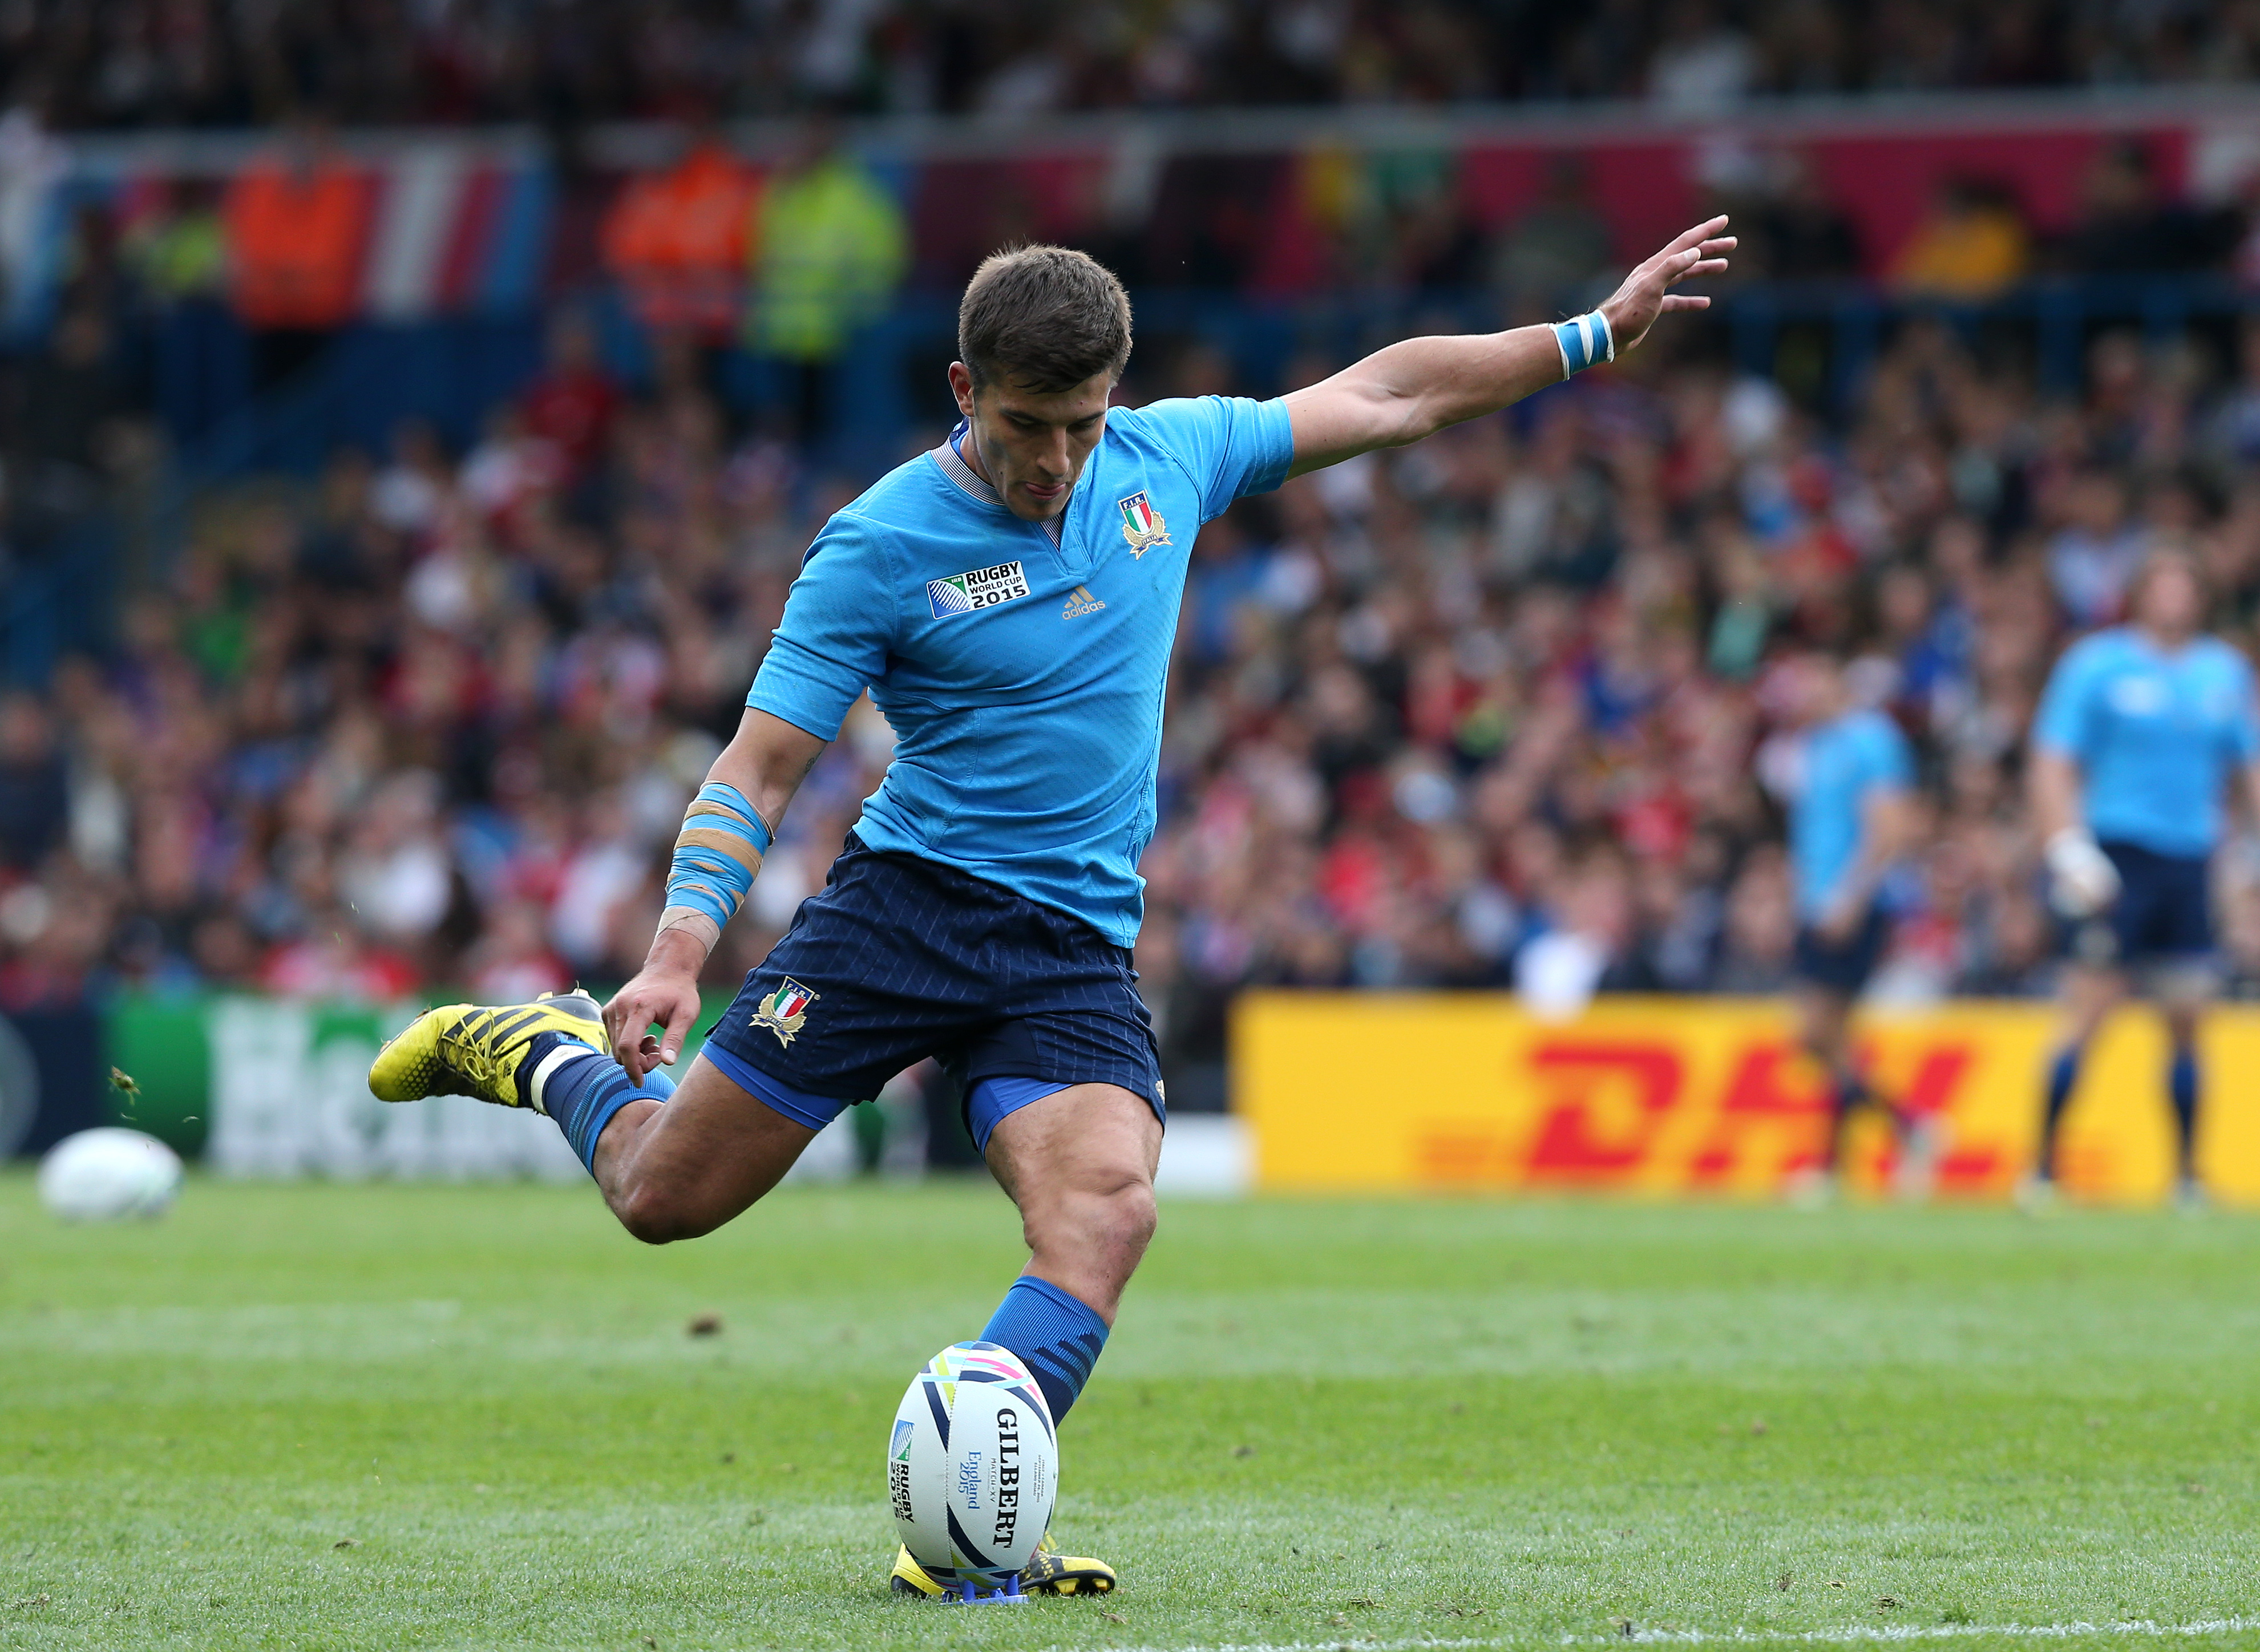 LEEDS, ENGLAND - SEPTEMBER 26 : Tommaso Allen of Italy takes a conversion in the second half during the 2015 Rugby World Cup Pool D match between Italy and Canada at Elland Road on September 26, 2015 in Leeds England. (Photo by Mark Runnacles/Getty Images)